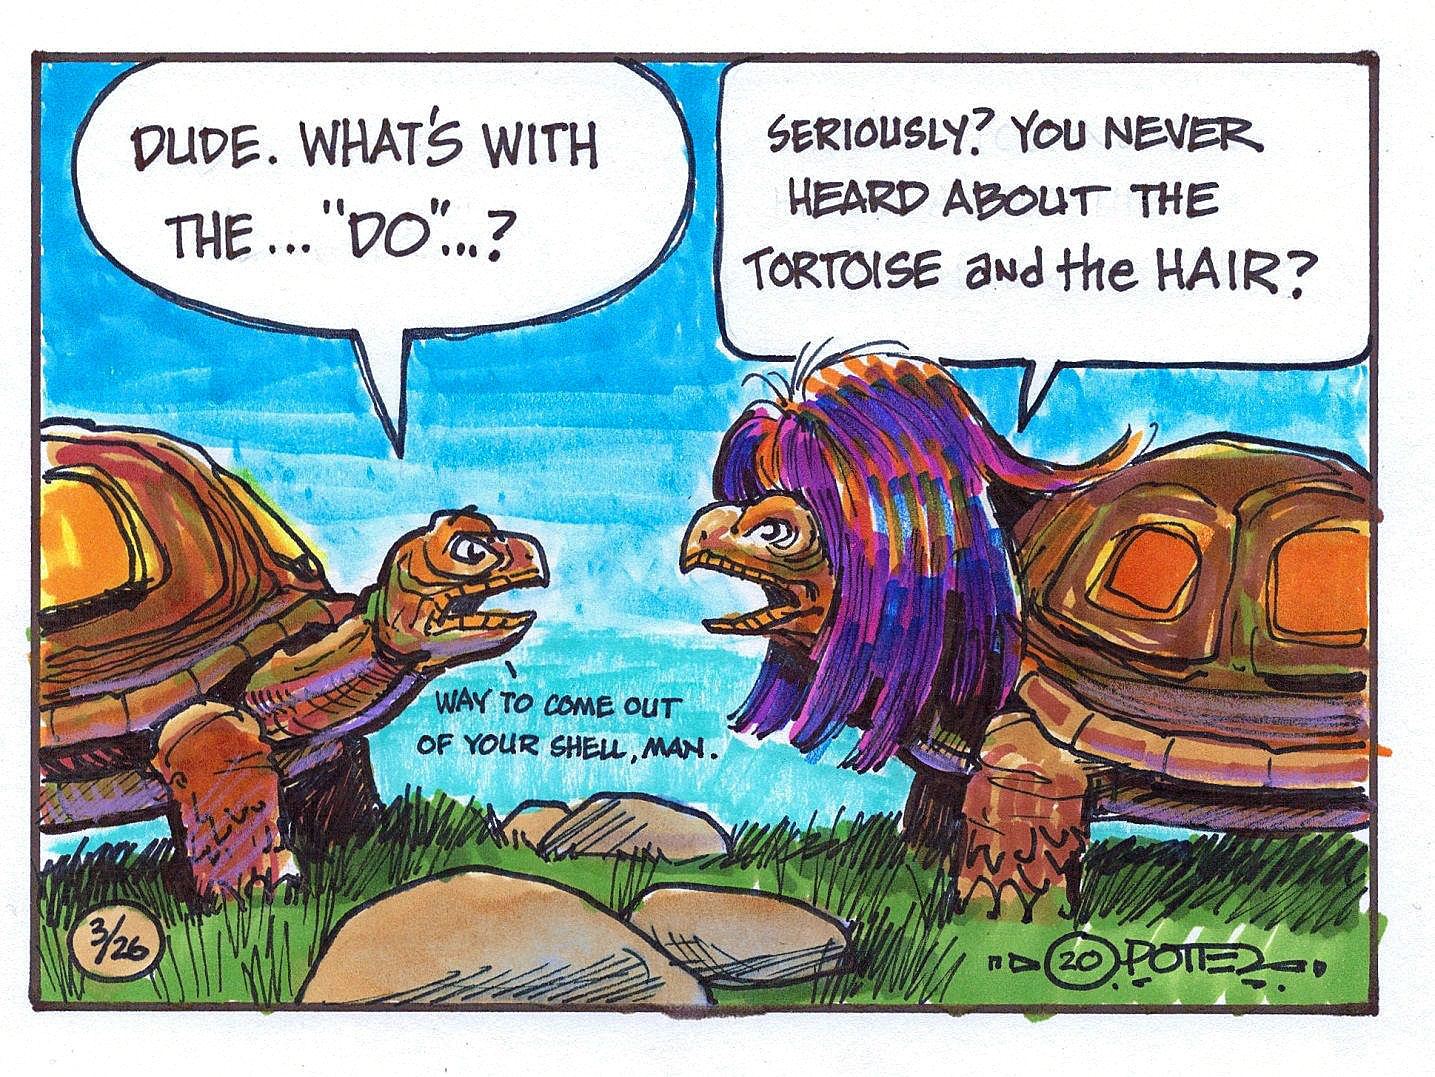 The Tortoise and the Hair